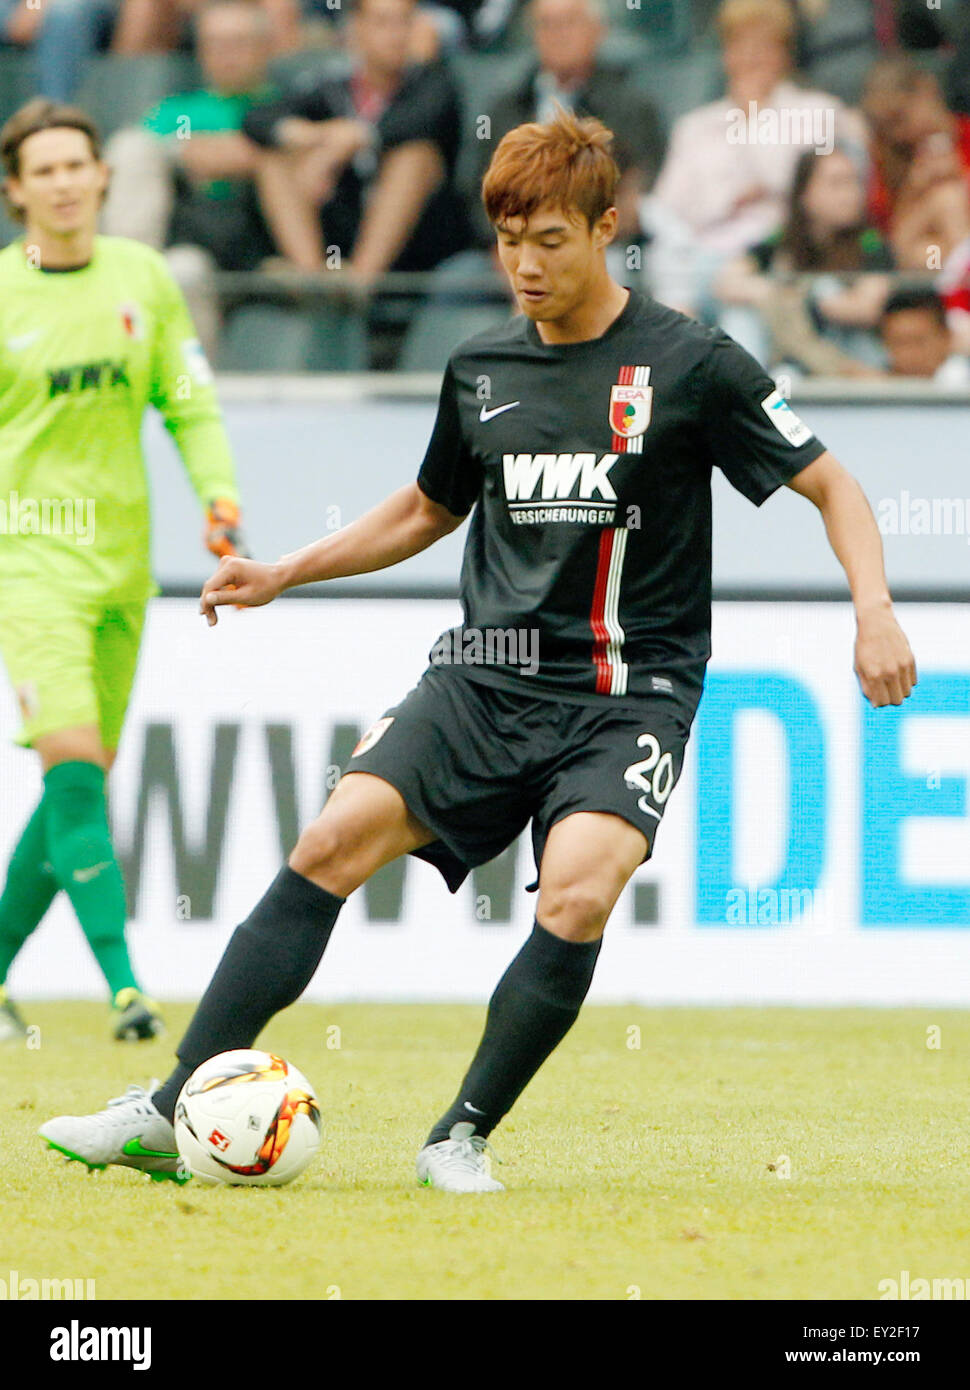 Moenchengladbach, Germany. 12th July, 2015. Augsburg's Jeong-Ho Hong in action during the Telekom Cup soccer match between FC Bayern Munich and FC Augsburg in Moenchengladbach, Germany, 12 July 2015. Photo: Roland Weihrauch/dpa/Alamy Live News Stock Photo